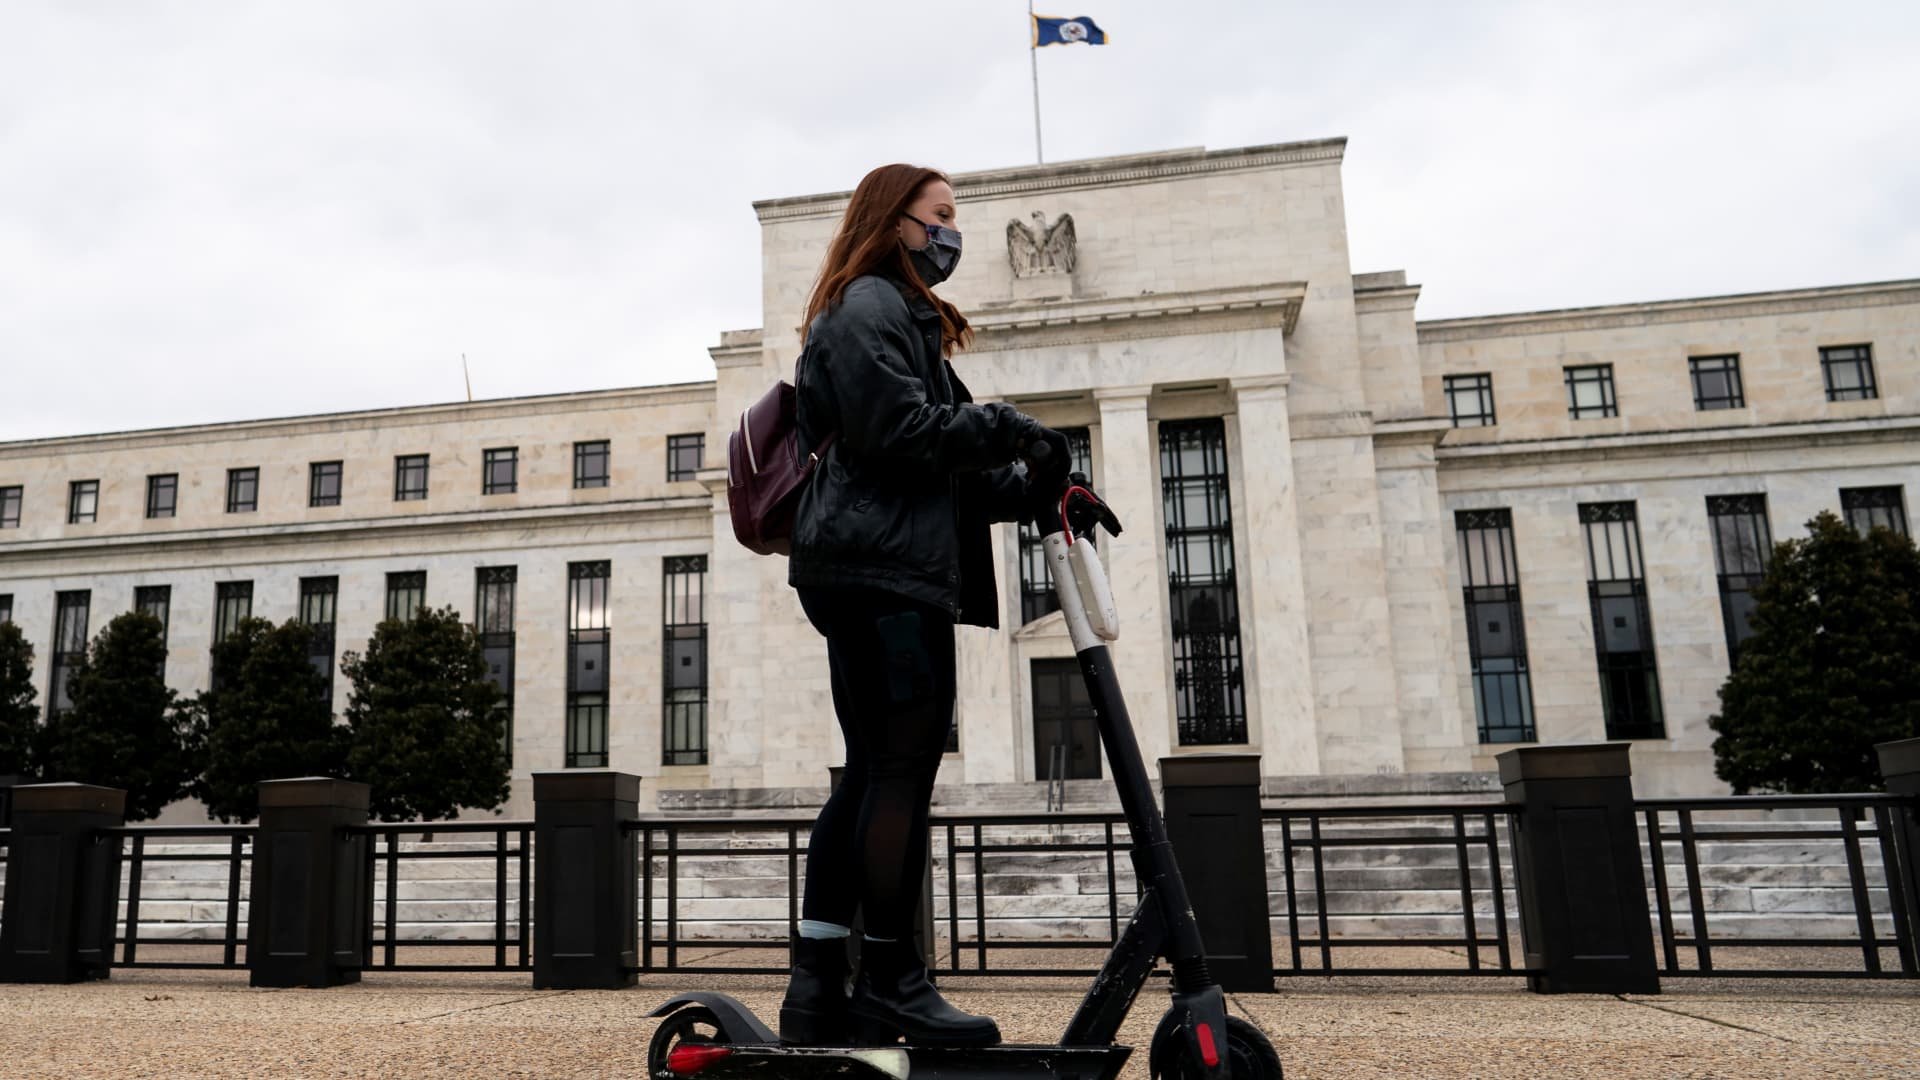 The Fed this summer will take another step in developing a digital currency